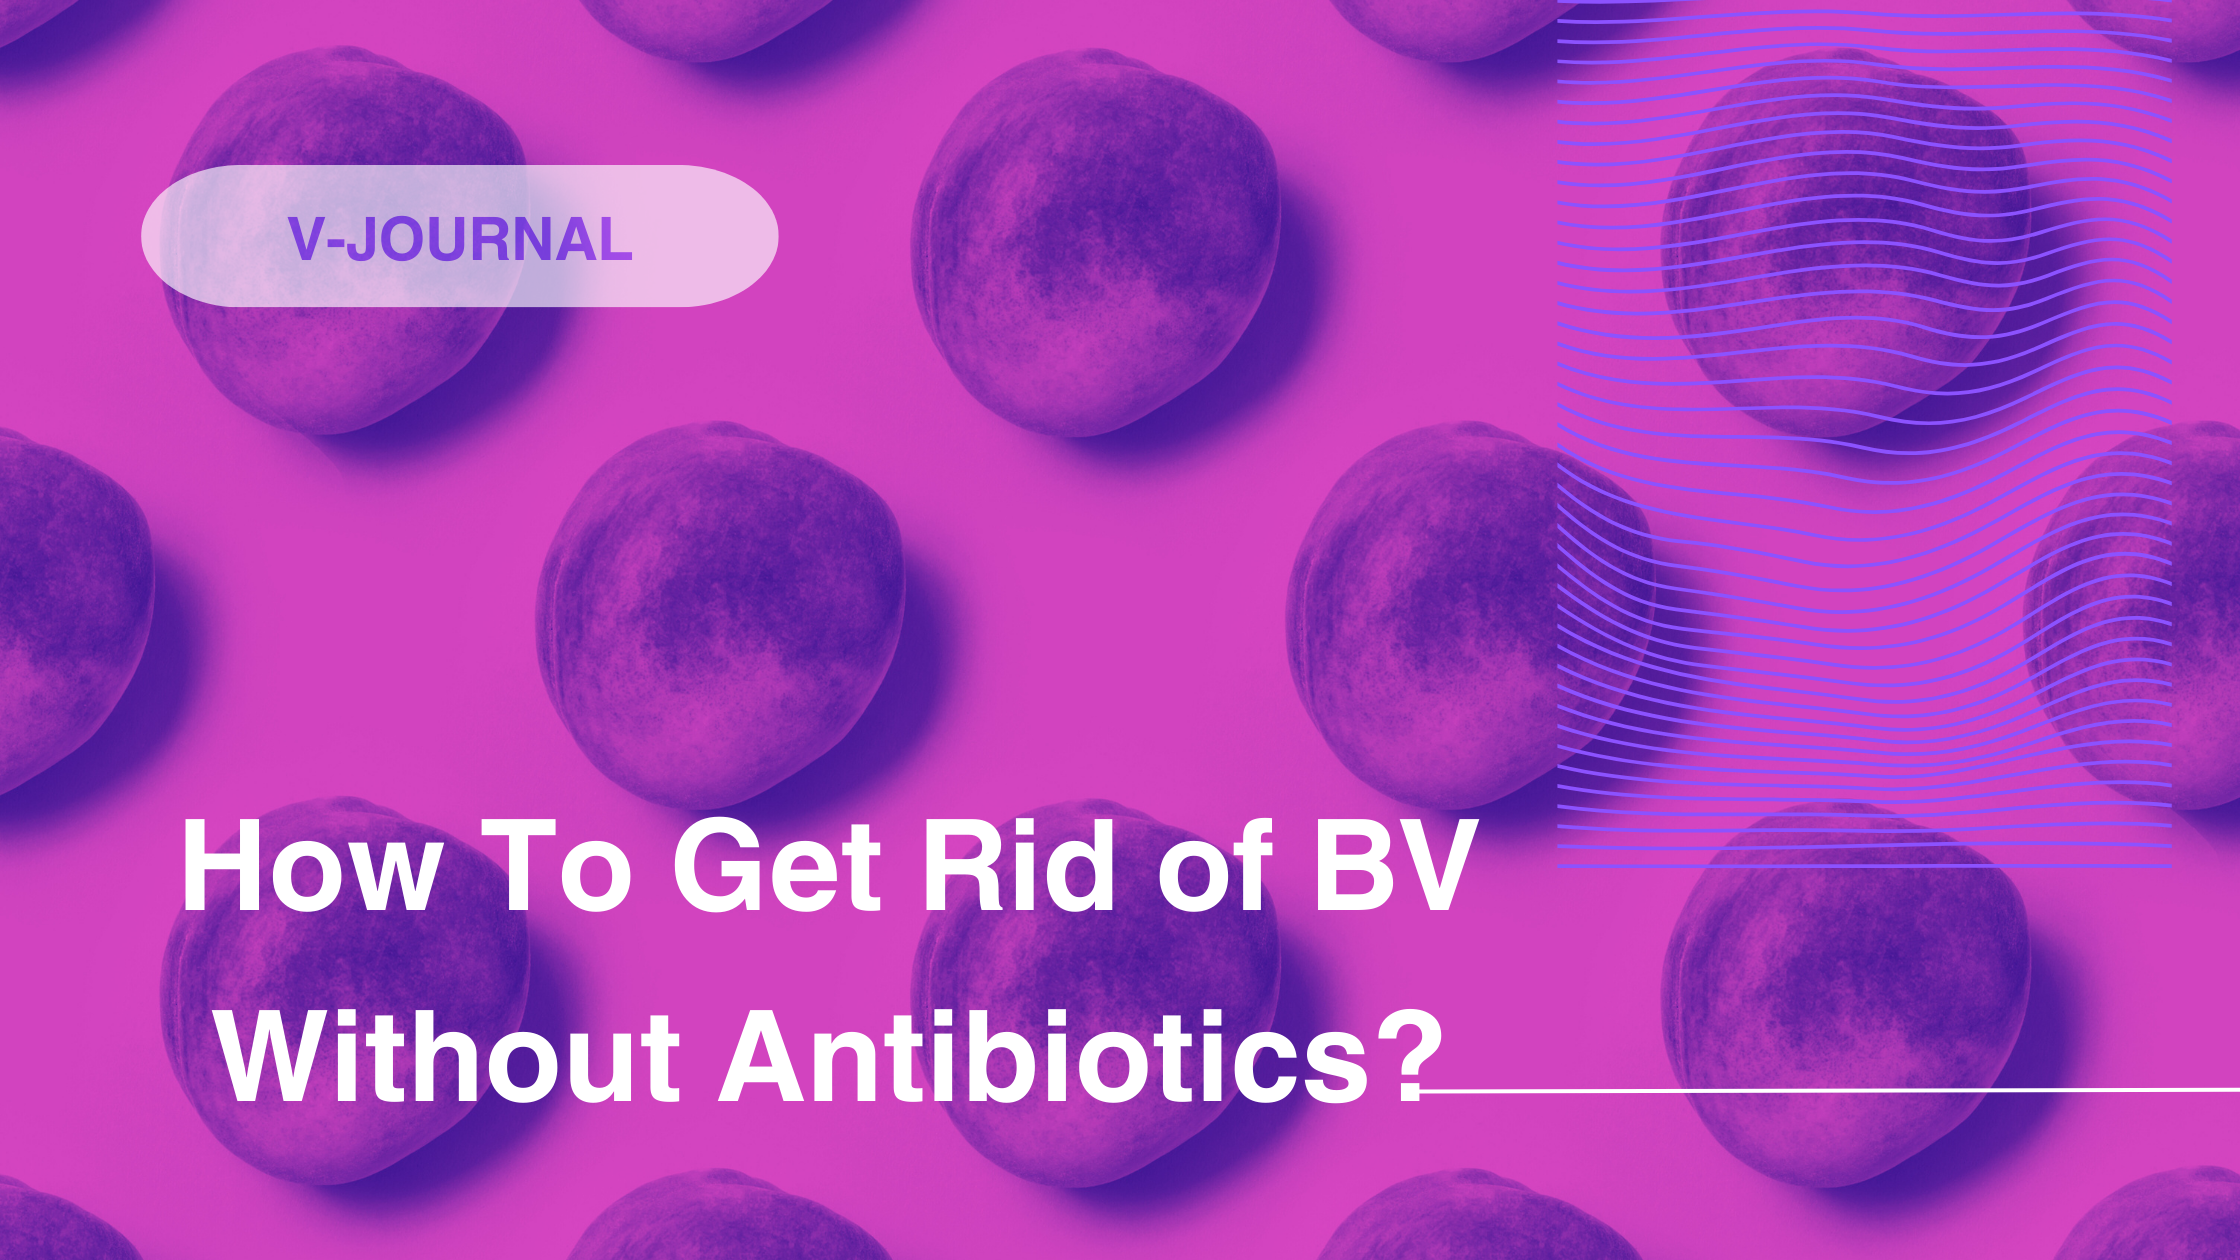 How To Get Rid of BV Without Antibiotics?